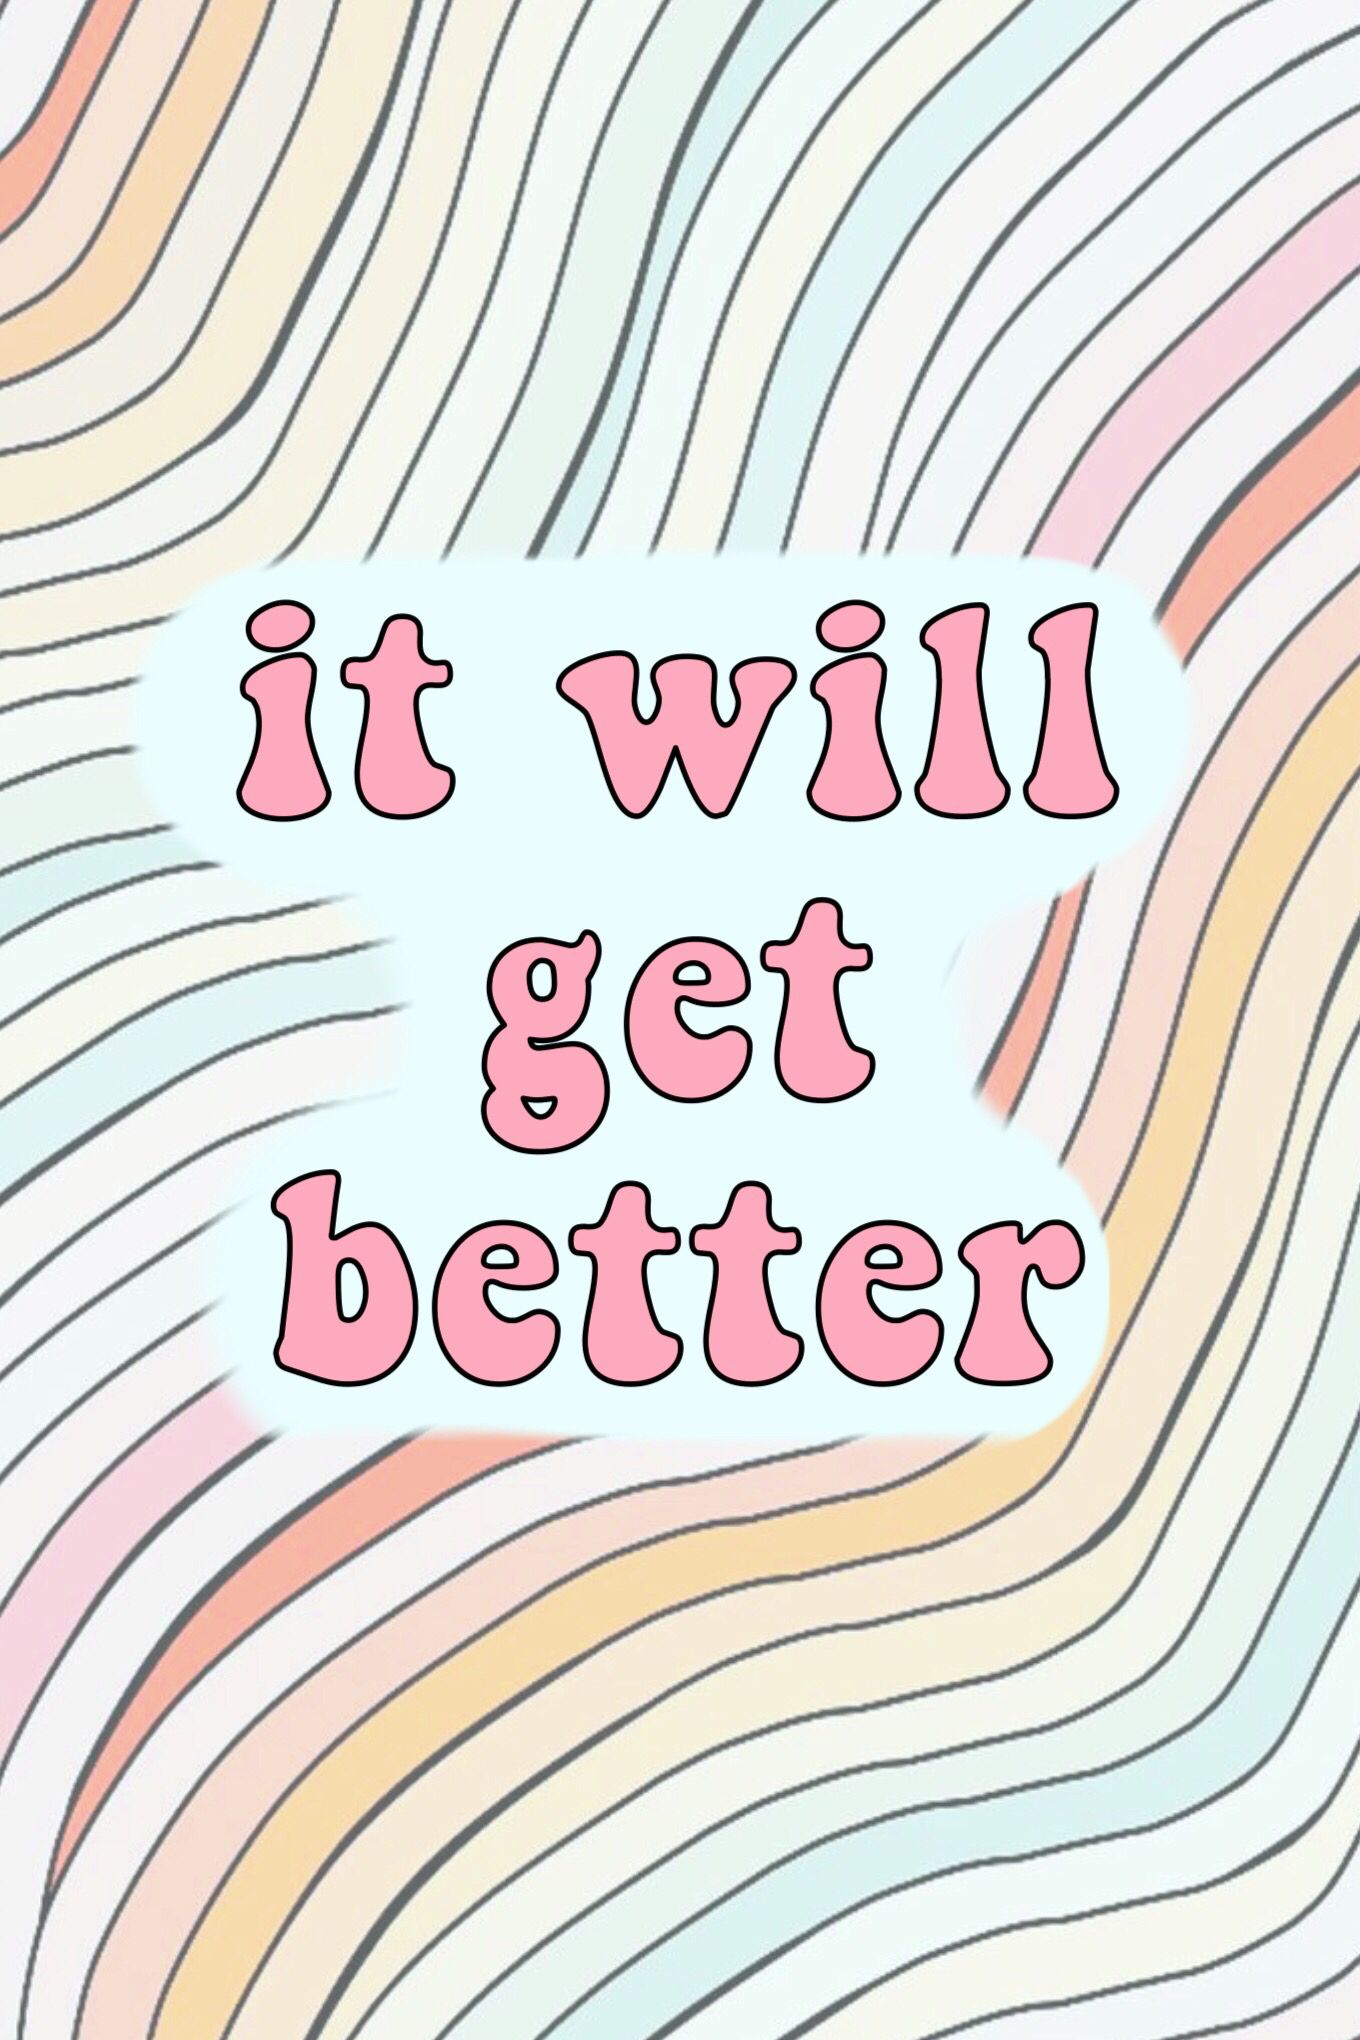 It will get better quote on a colorful background - VSCO